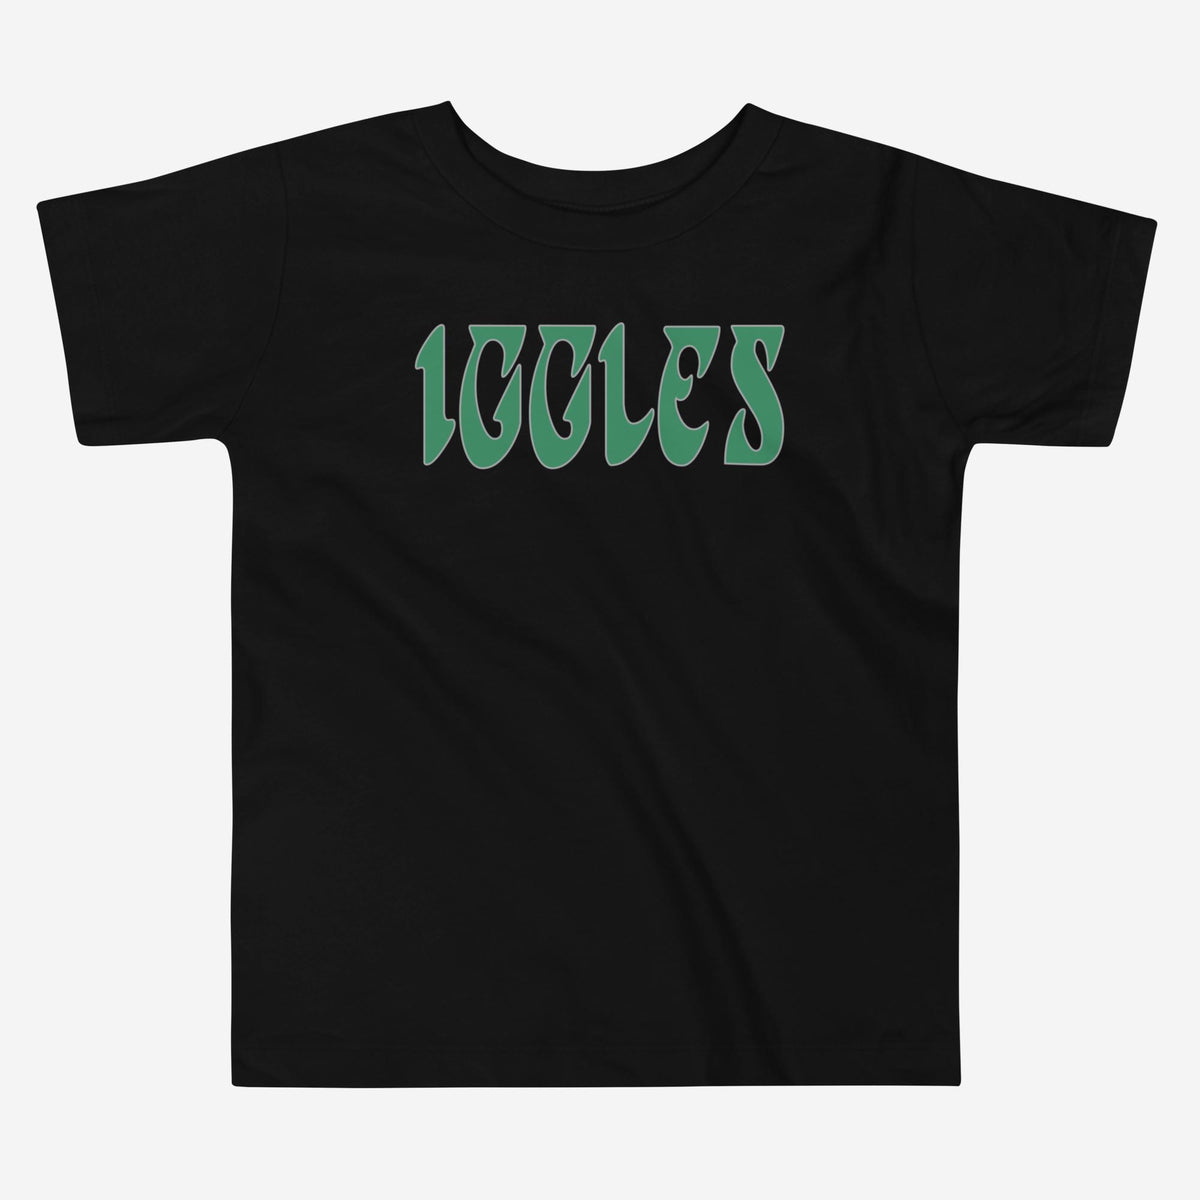 &quot;Iggles&quot; Toddler Tee